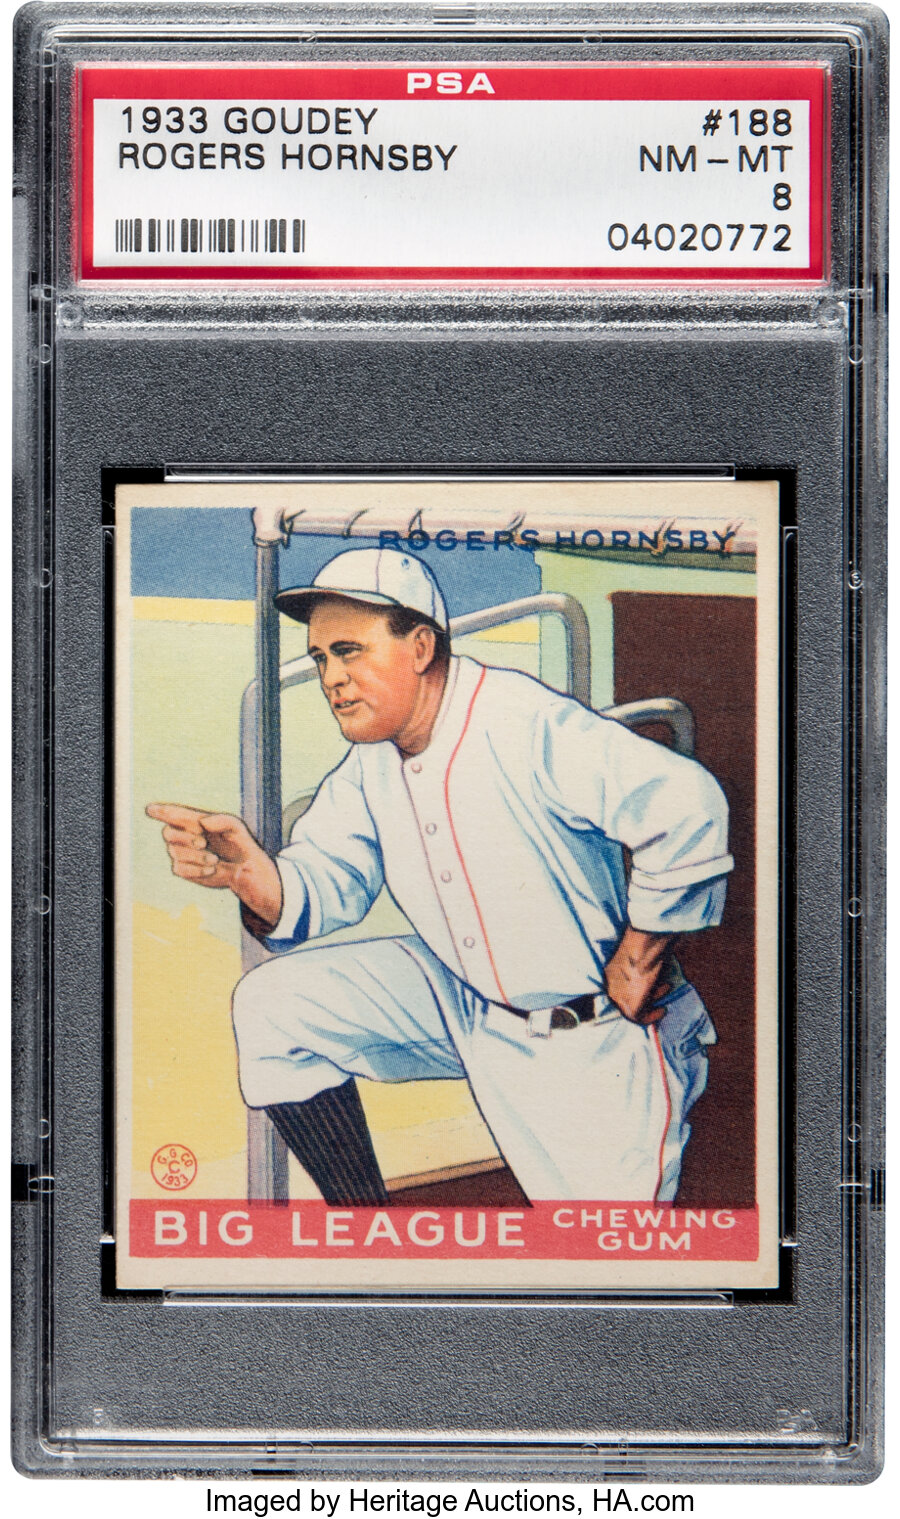 1933 Goudey Rogers Hornsby #188 PSA NM-MT 8